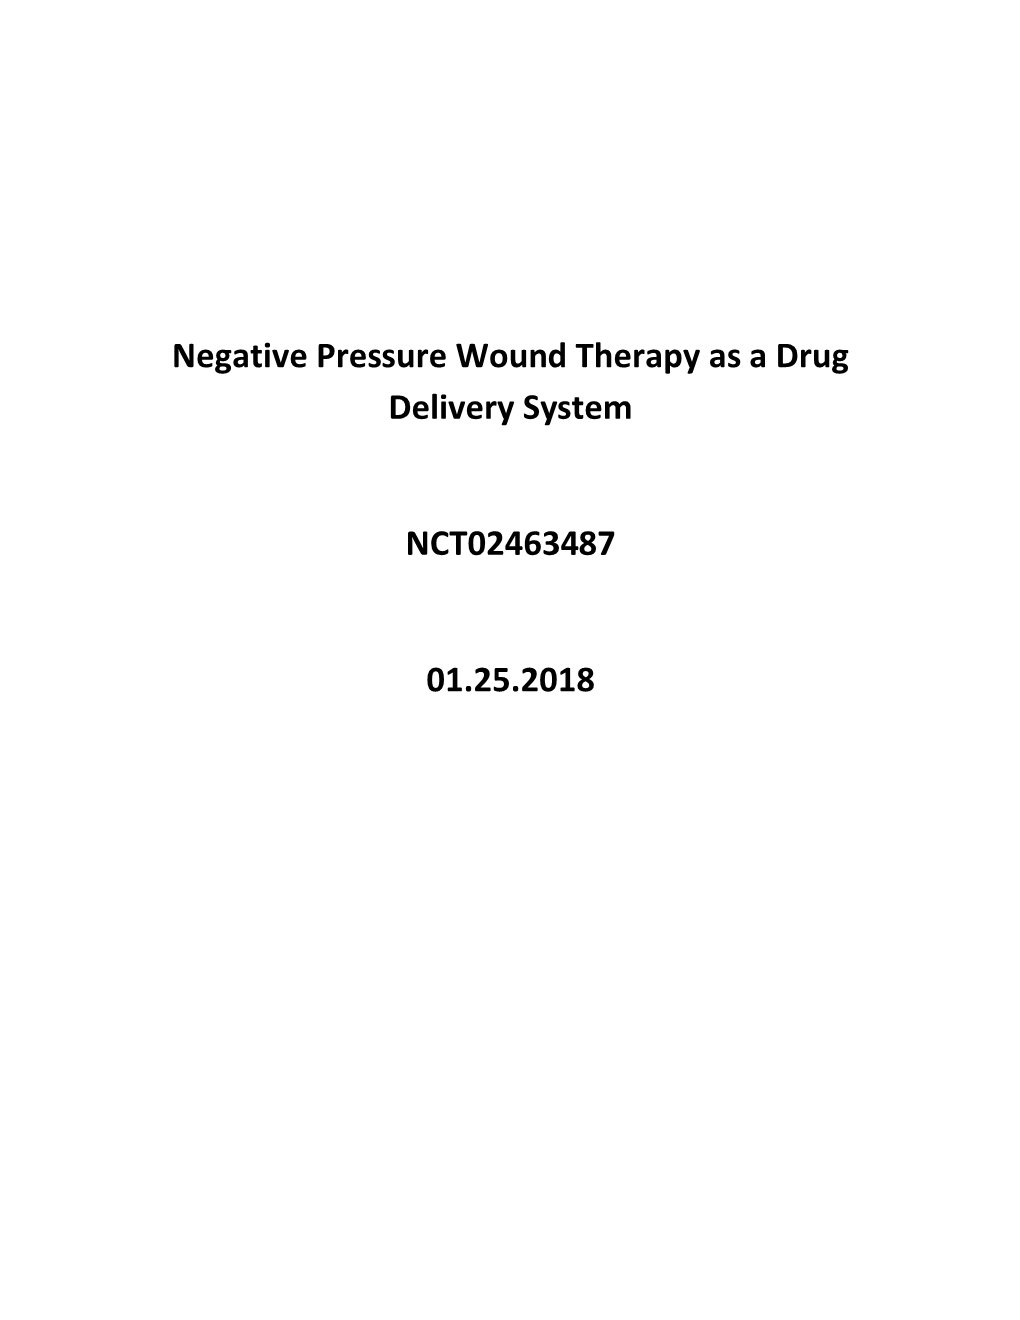 Negative Pressure Wound Therapy As a Drug Delivery System NCT02463487 01.25.2018